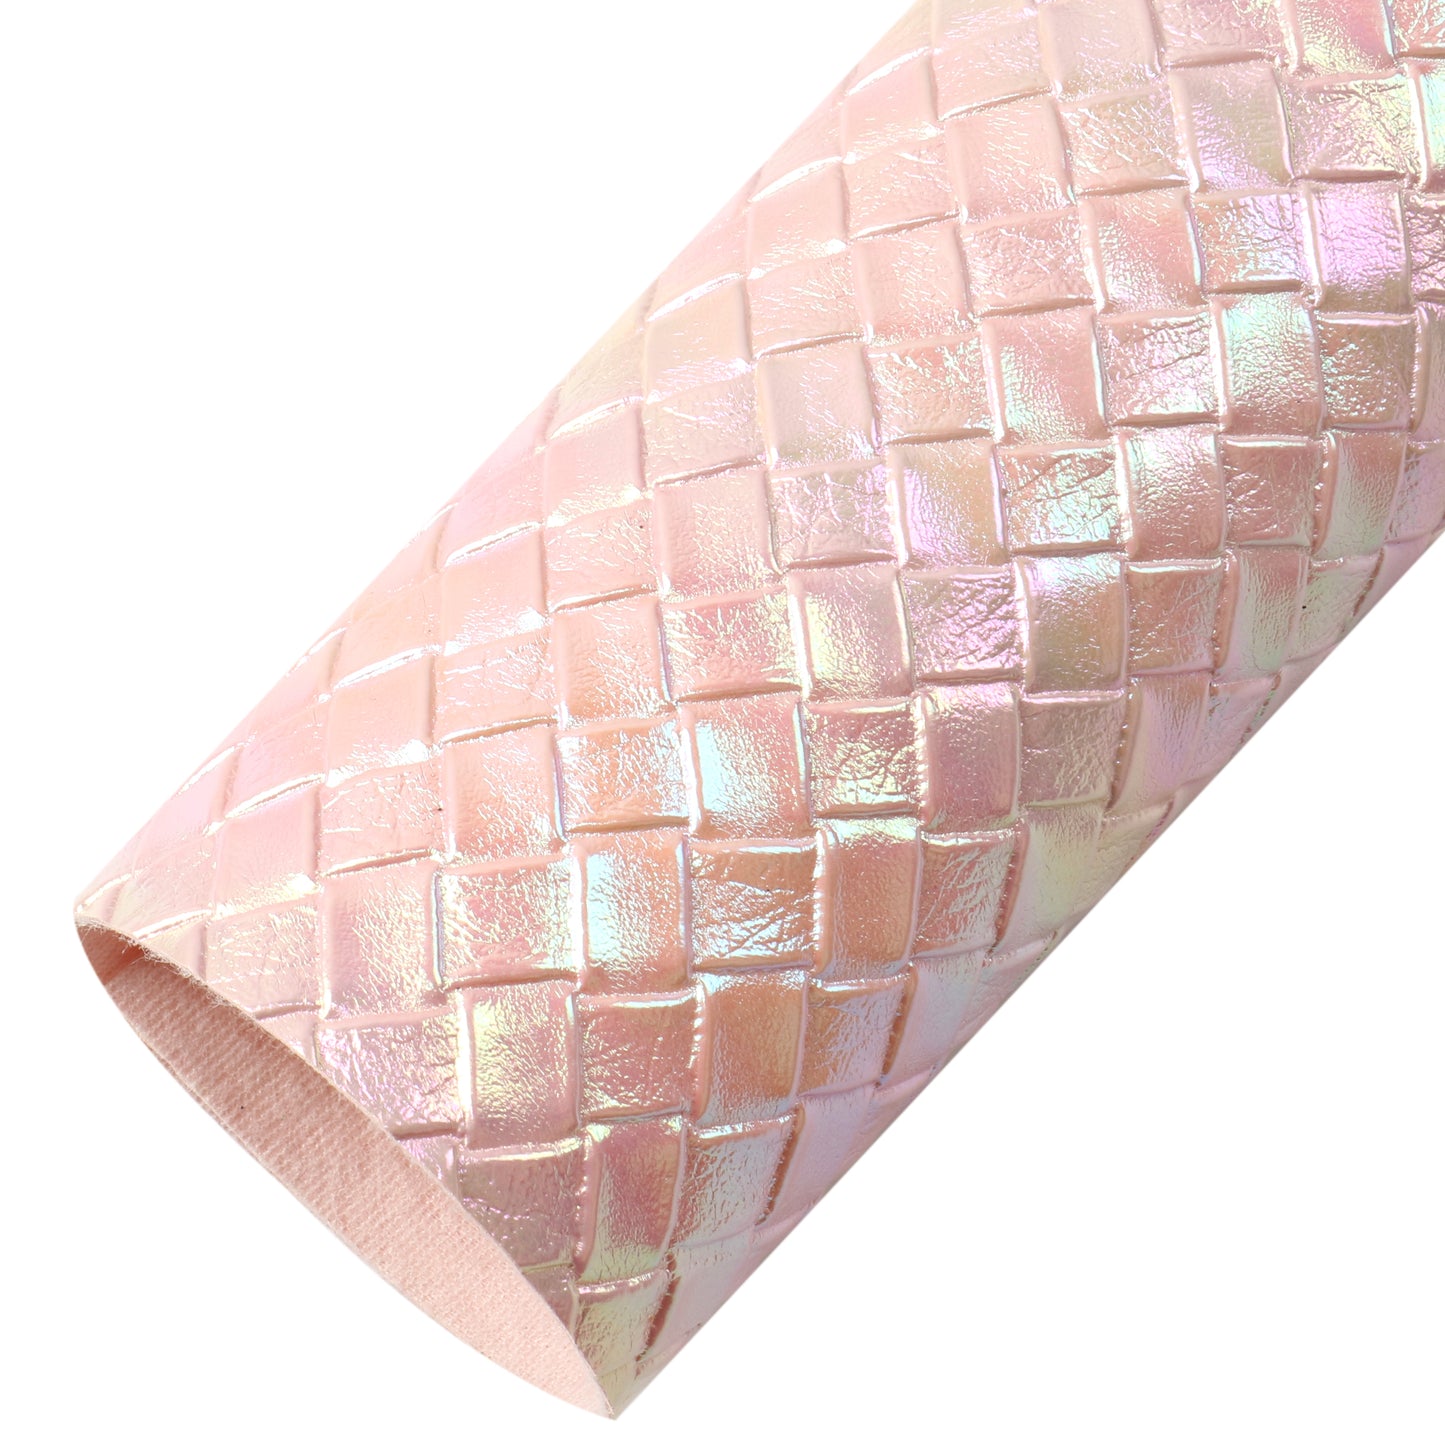 Bump Textured Holographic Braided Faux Leather Sheets Wholesale